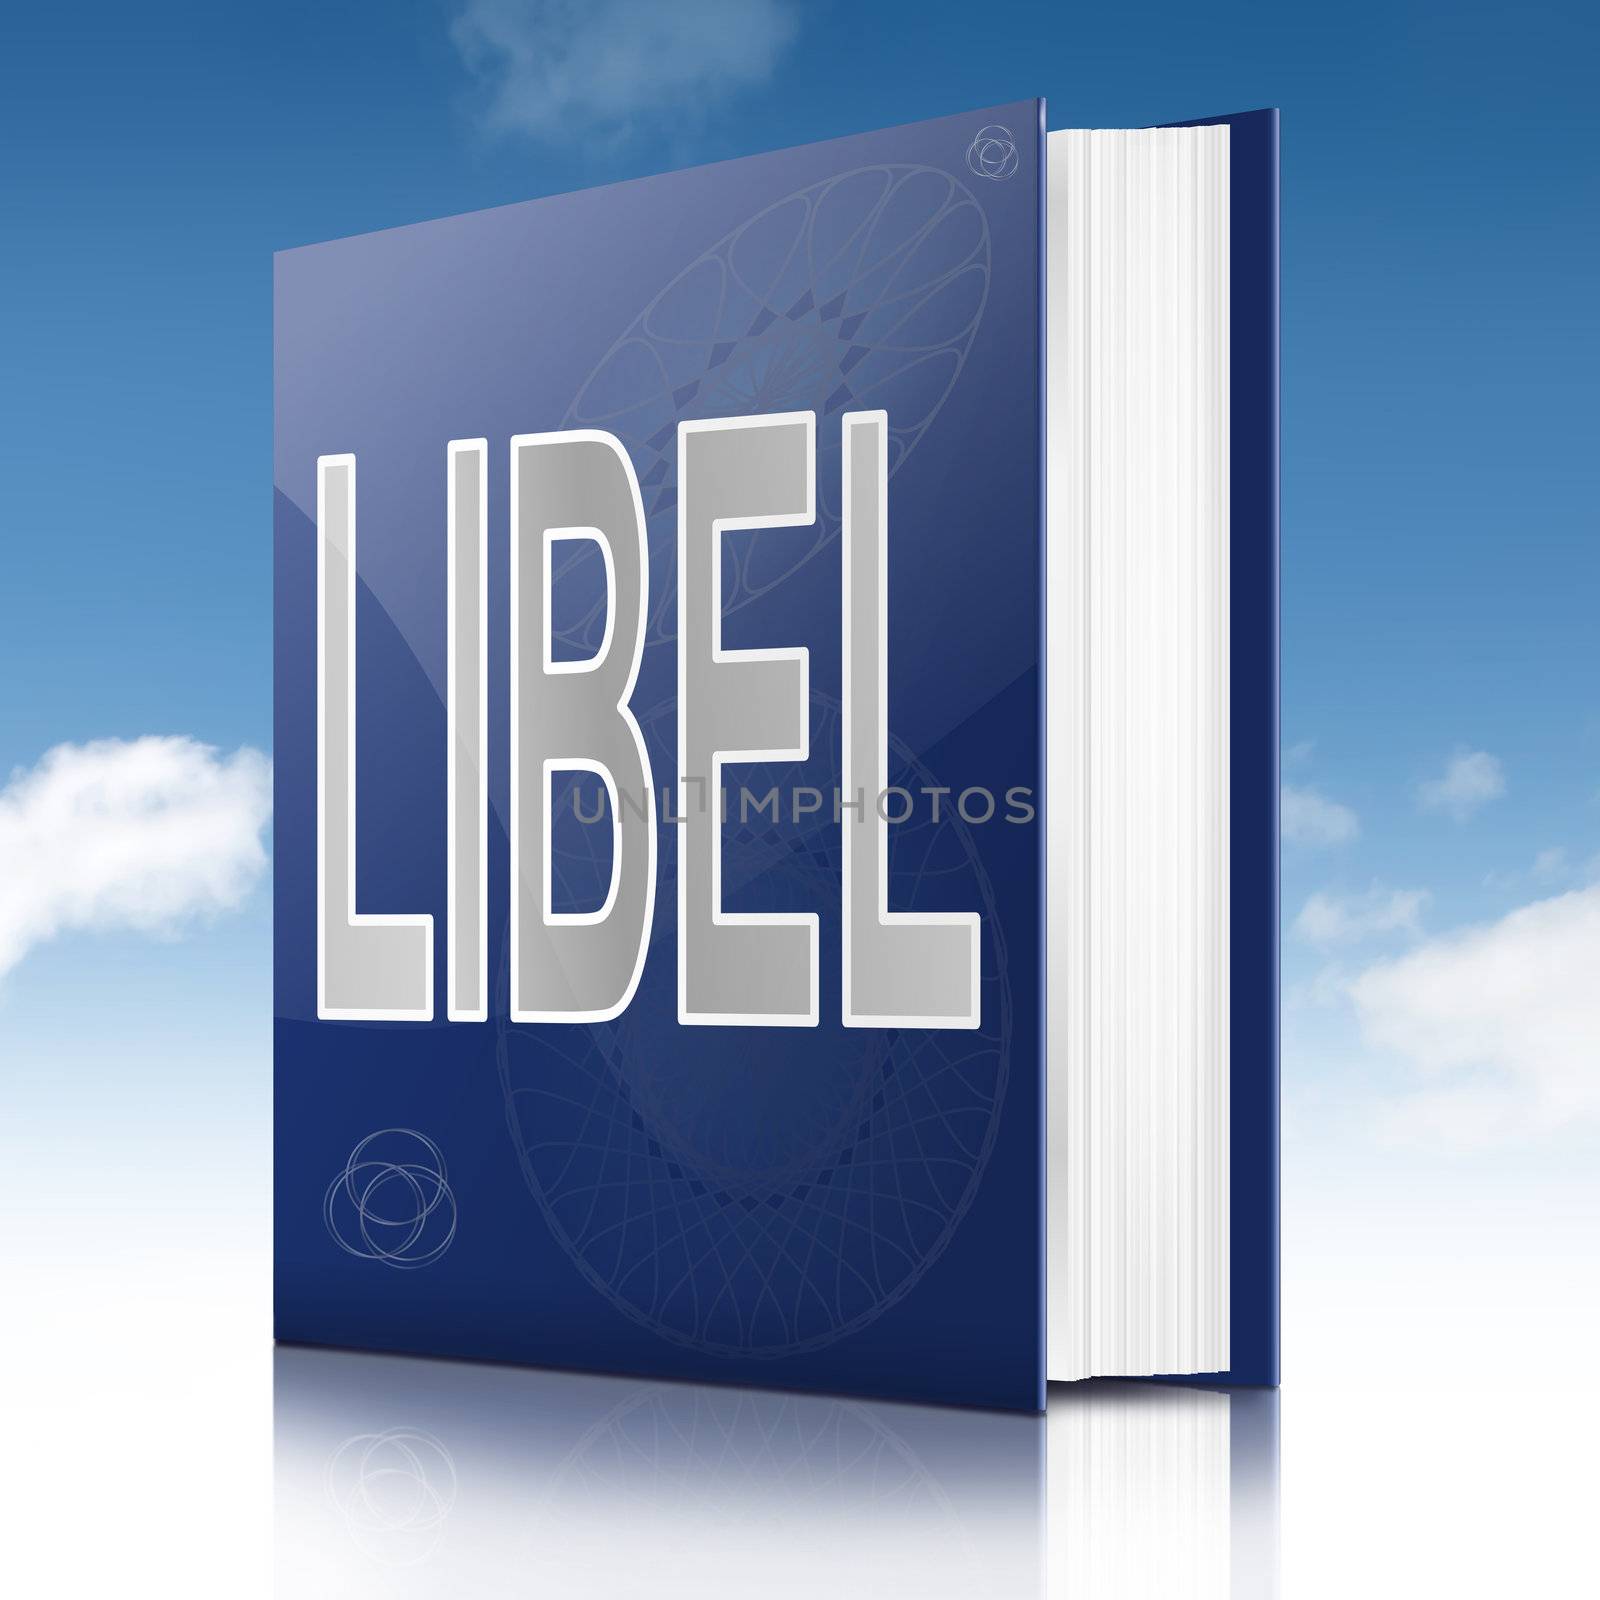 Illustration depicting a book with a libel concept title. Sky background.